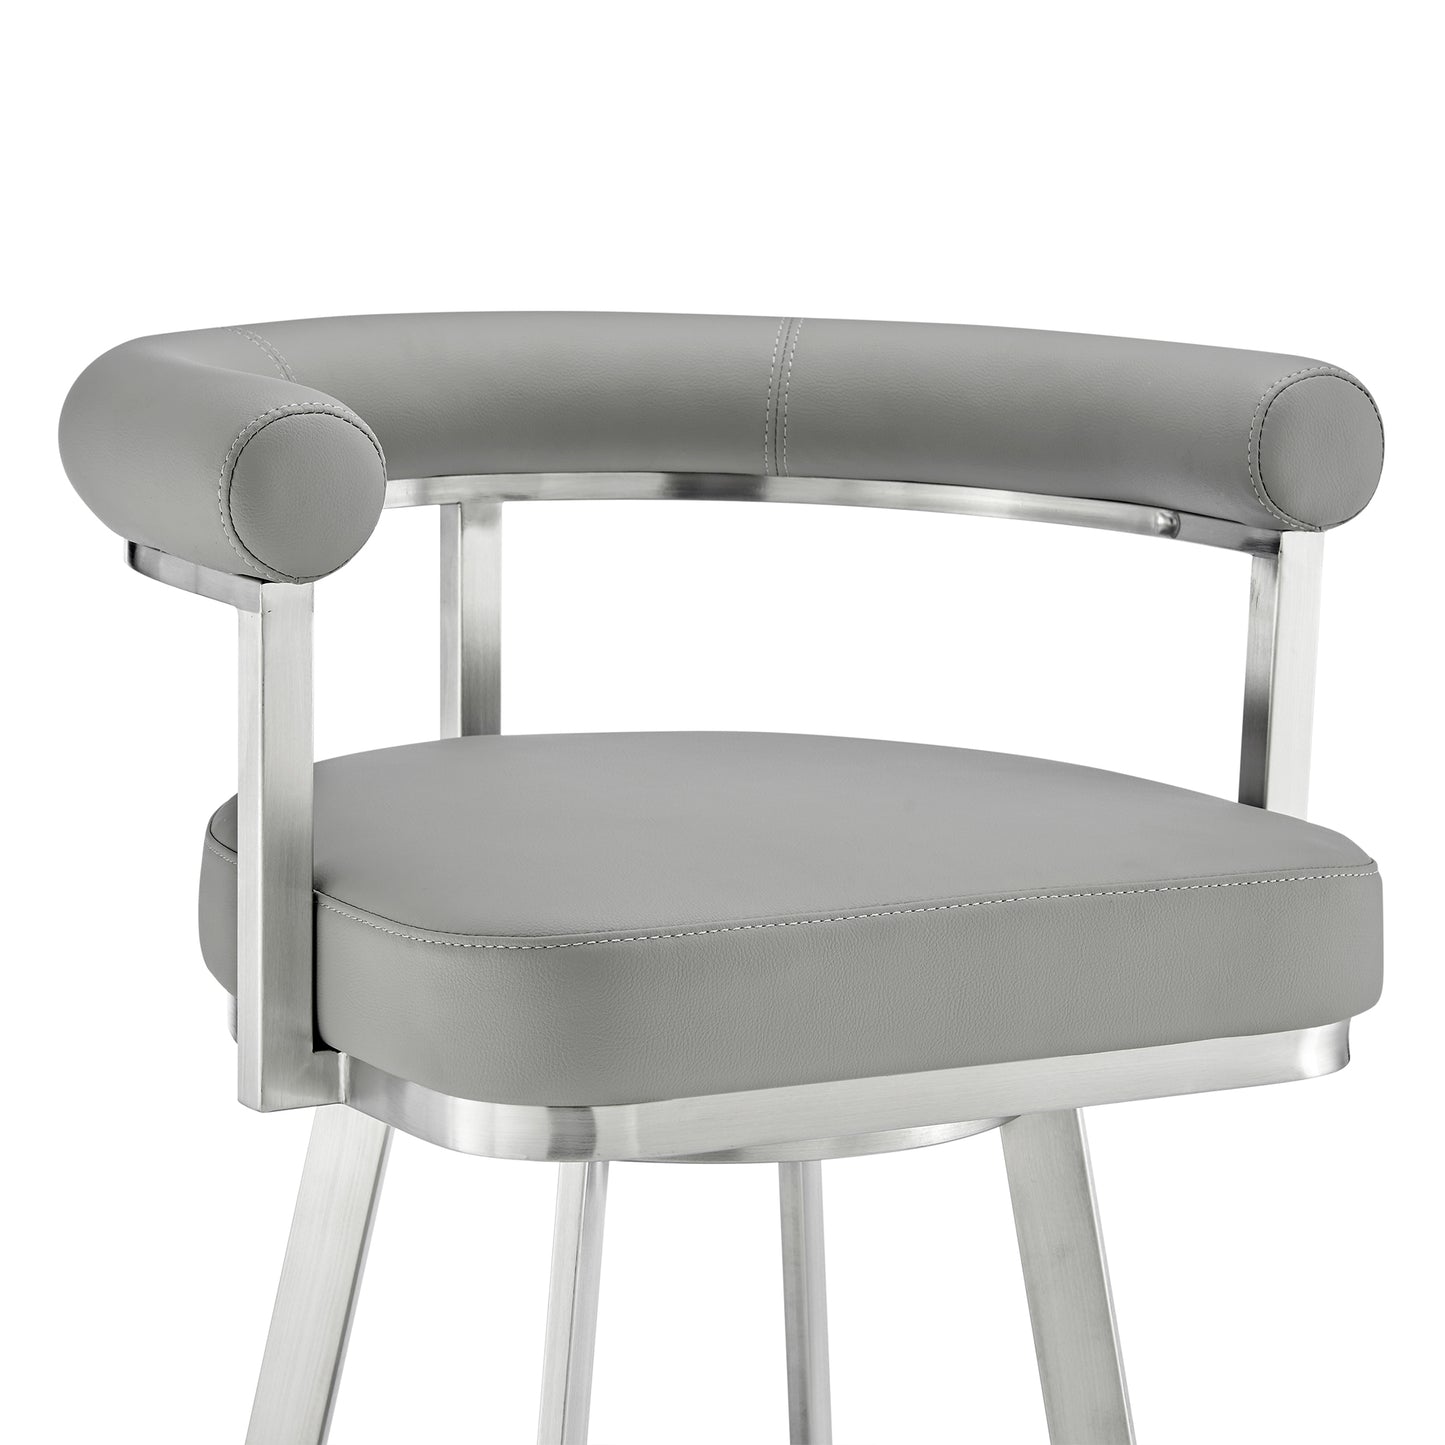 Magnolia 26" Swivel Counter Stool in Brushed Stainless Steel with Light Gray Faux Leather